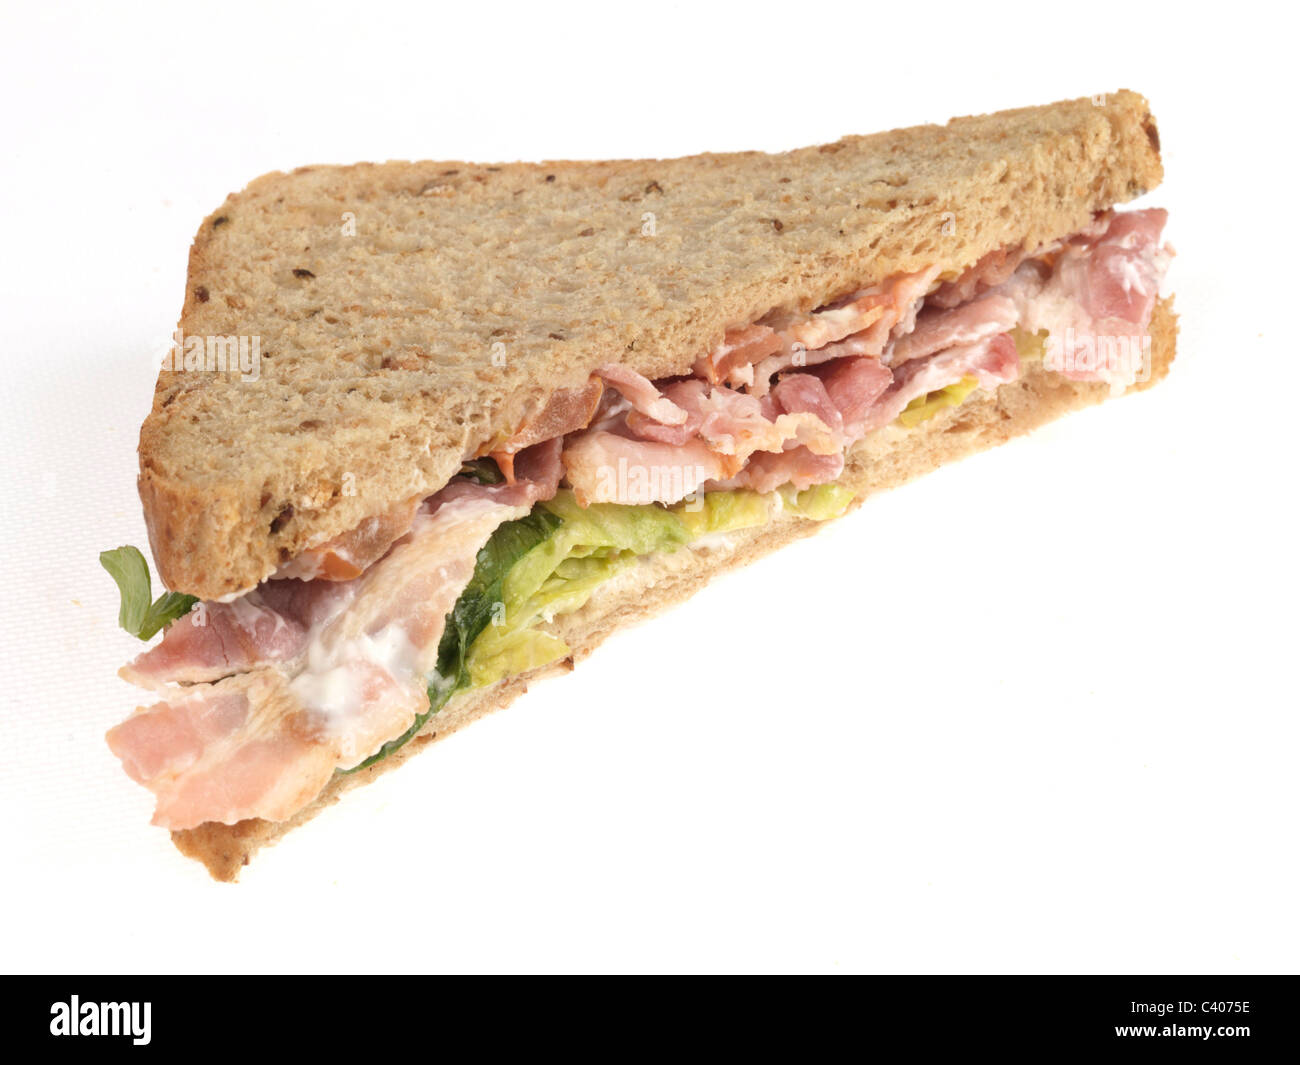 Freshly Prepared Bacon Lettuce And Tomato BLT Sandwich On Wholegrain Brown Bread Isolated Against A White Background With No People Stock Photo